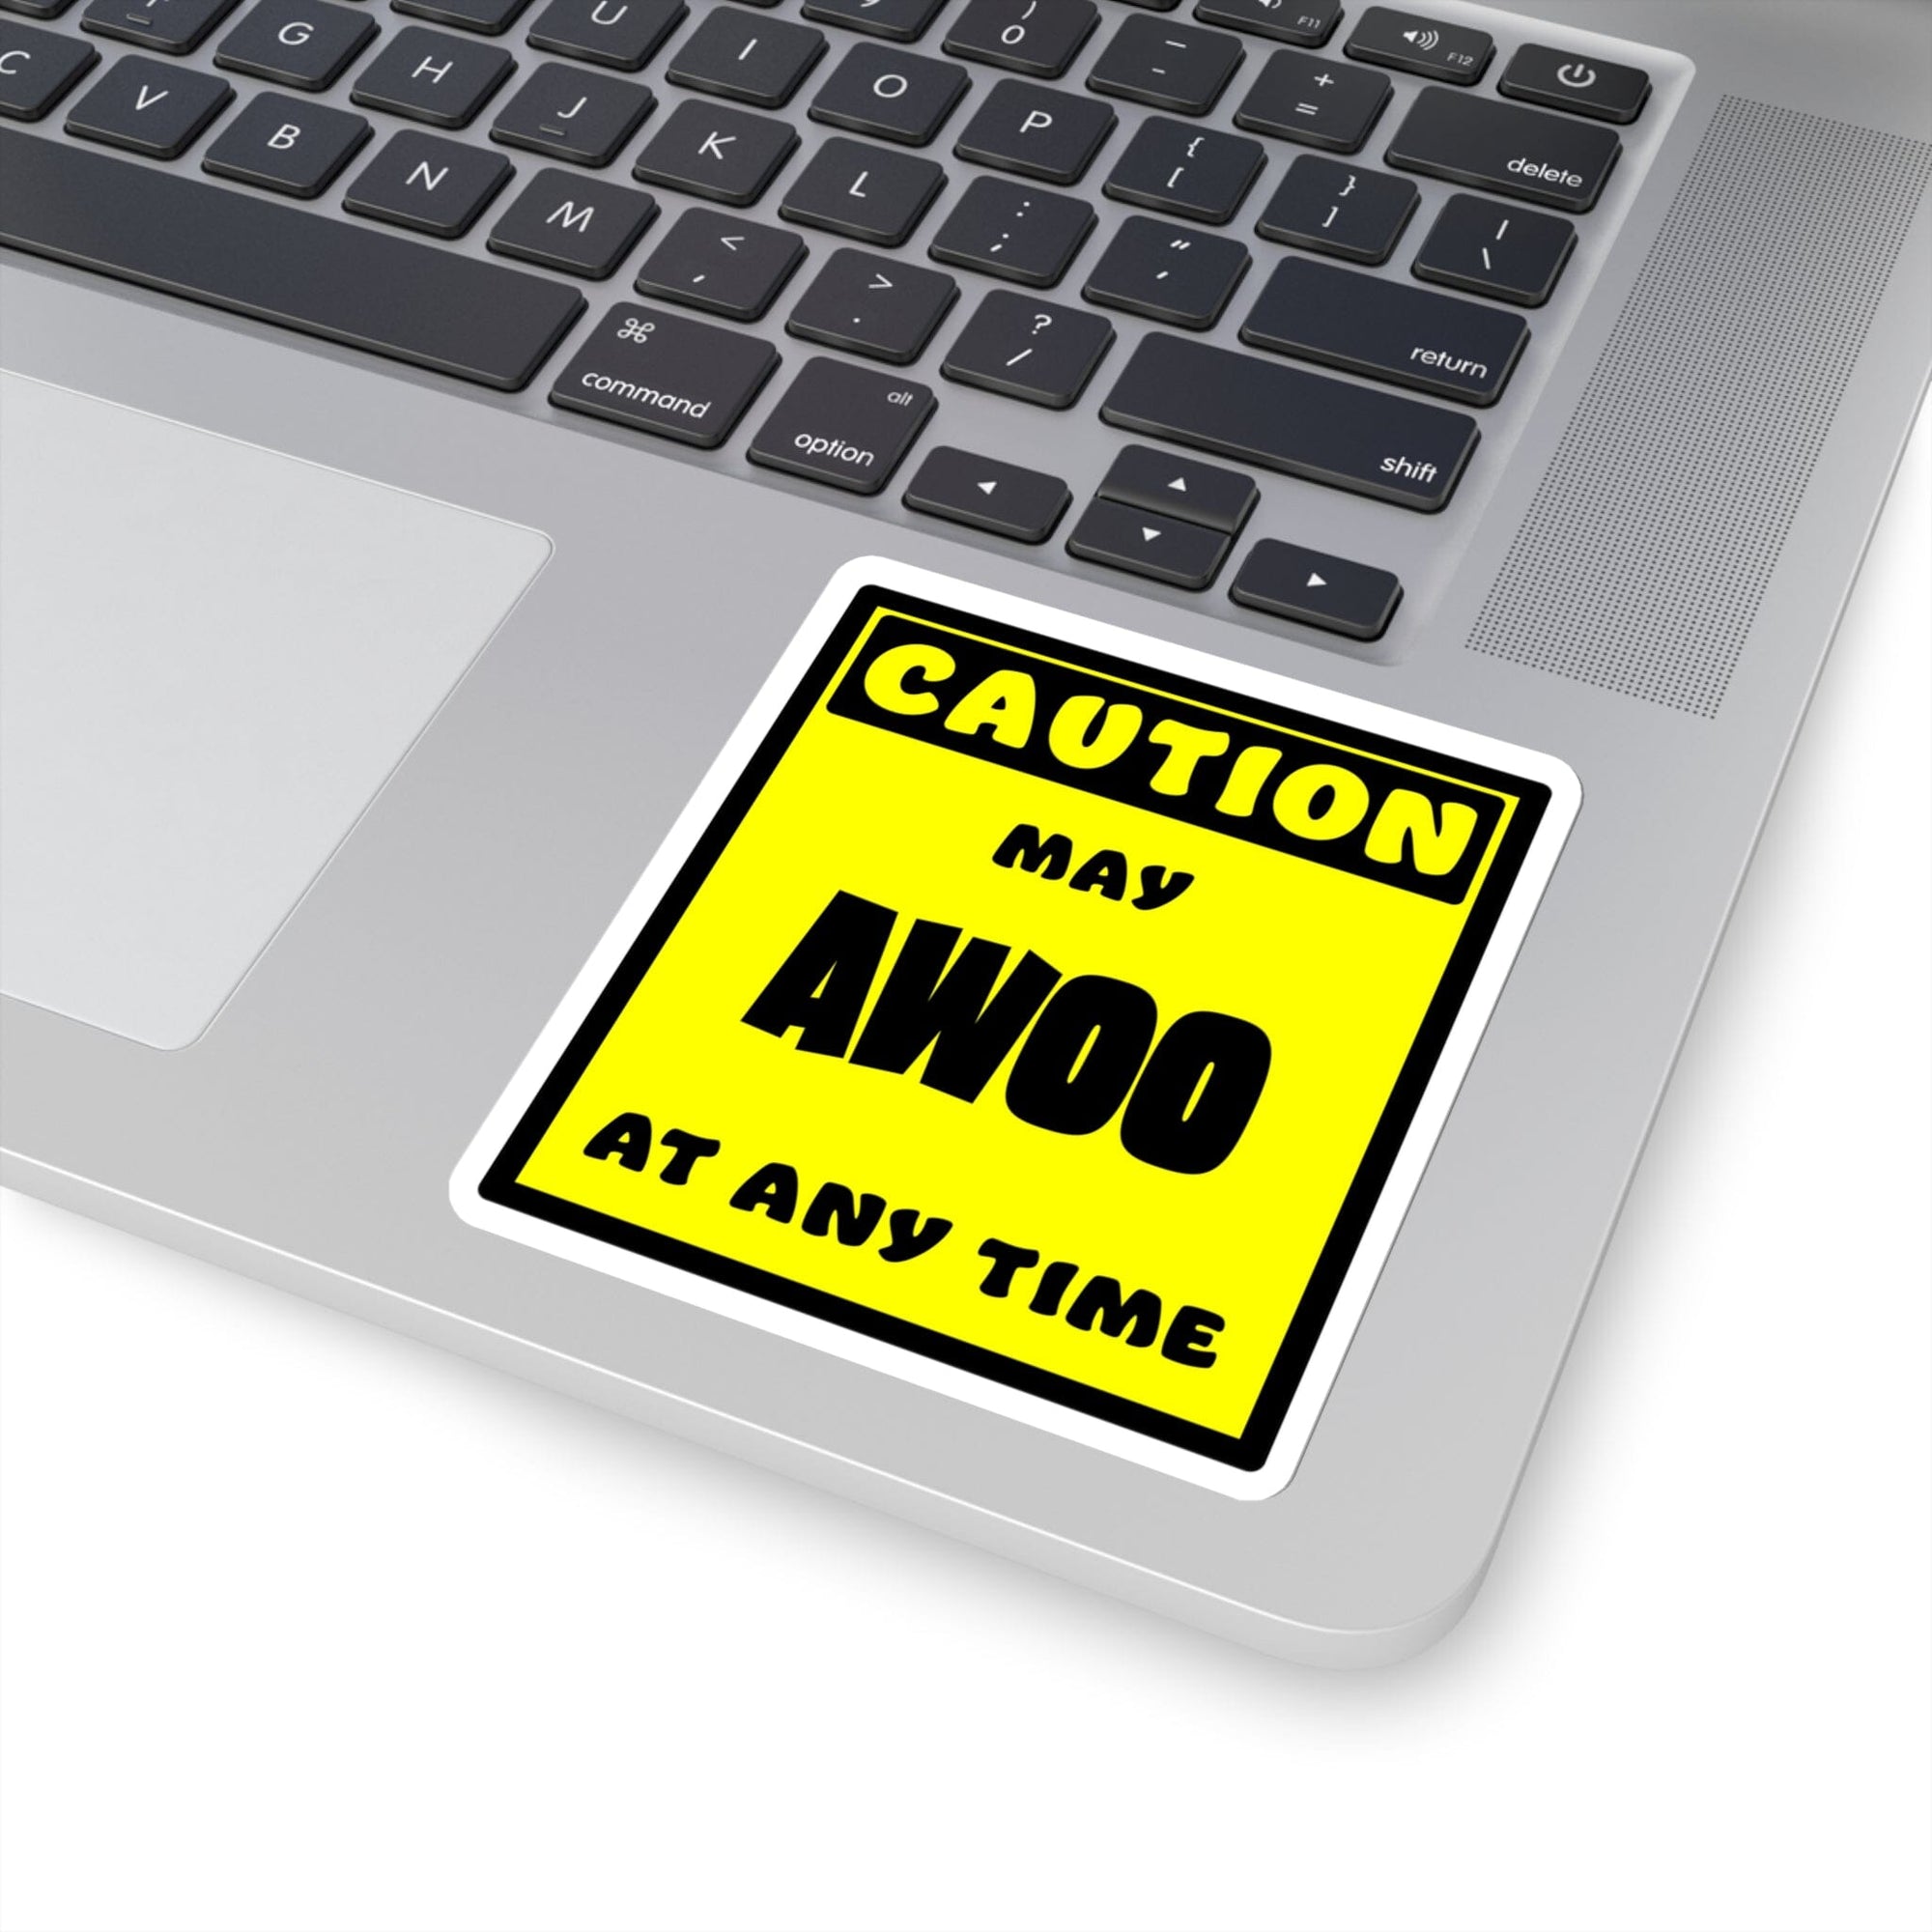 CAUTION! May AWOO at any time! - Sticker Sticker AFLT-Whootorca 